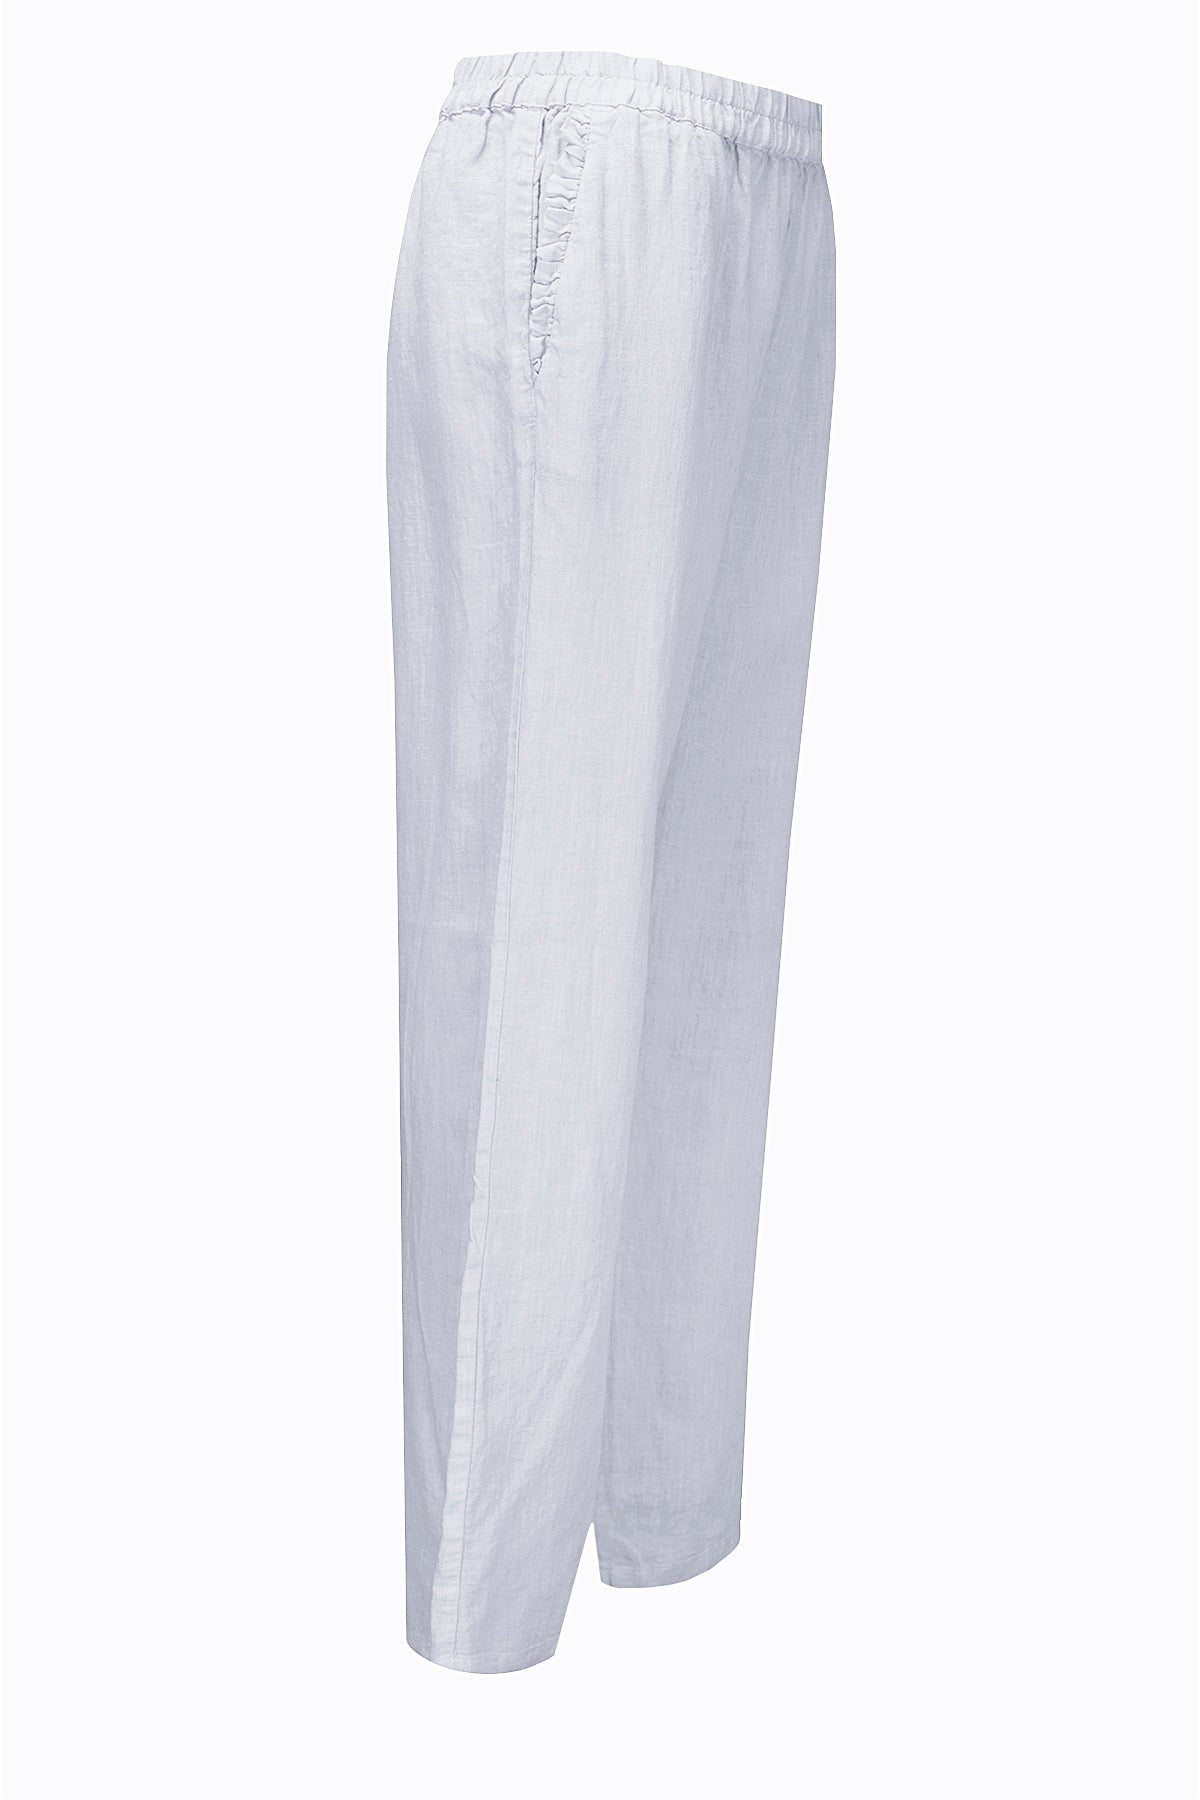 LUXZUZ // ONE TWO Oline Pant Pant 902 Natural White